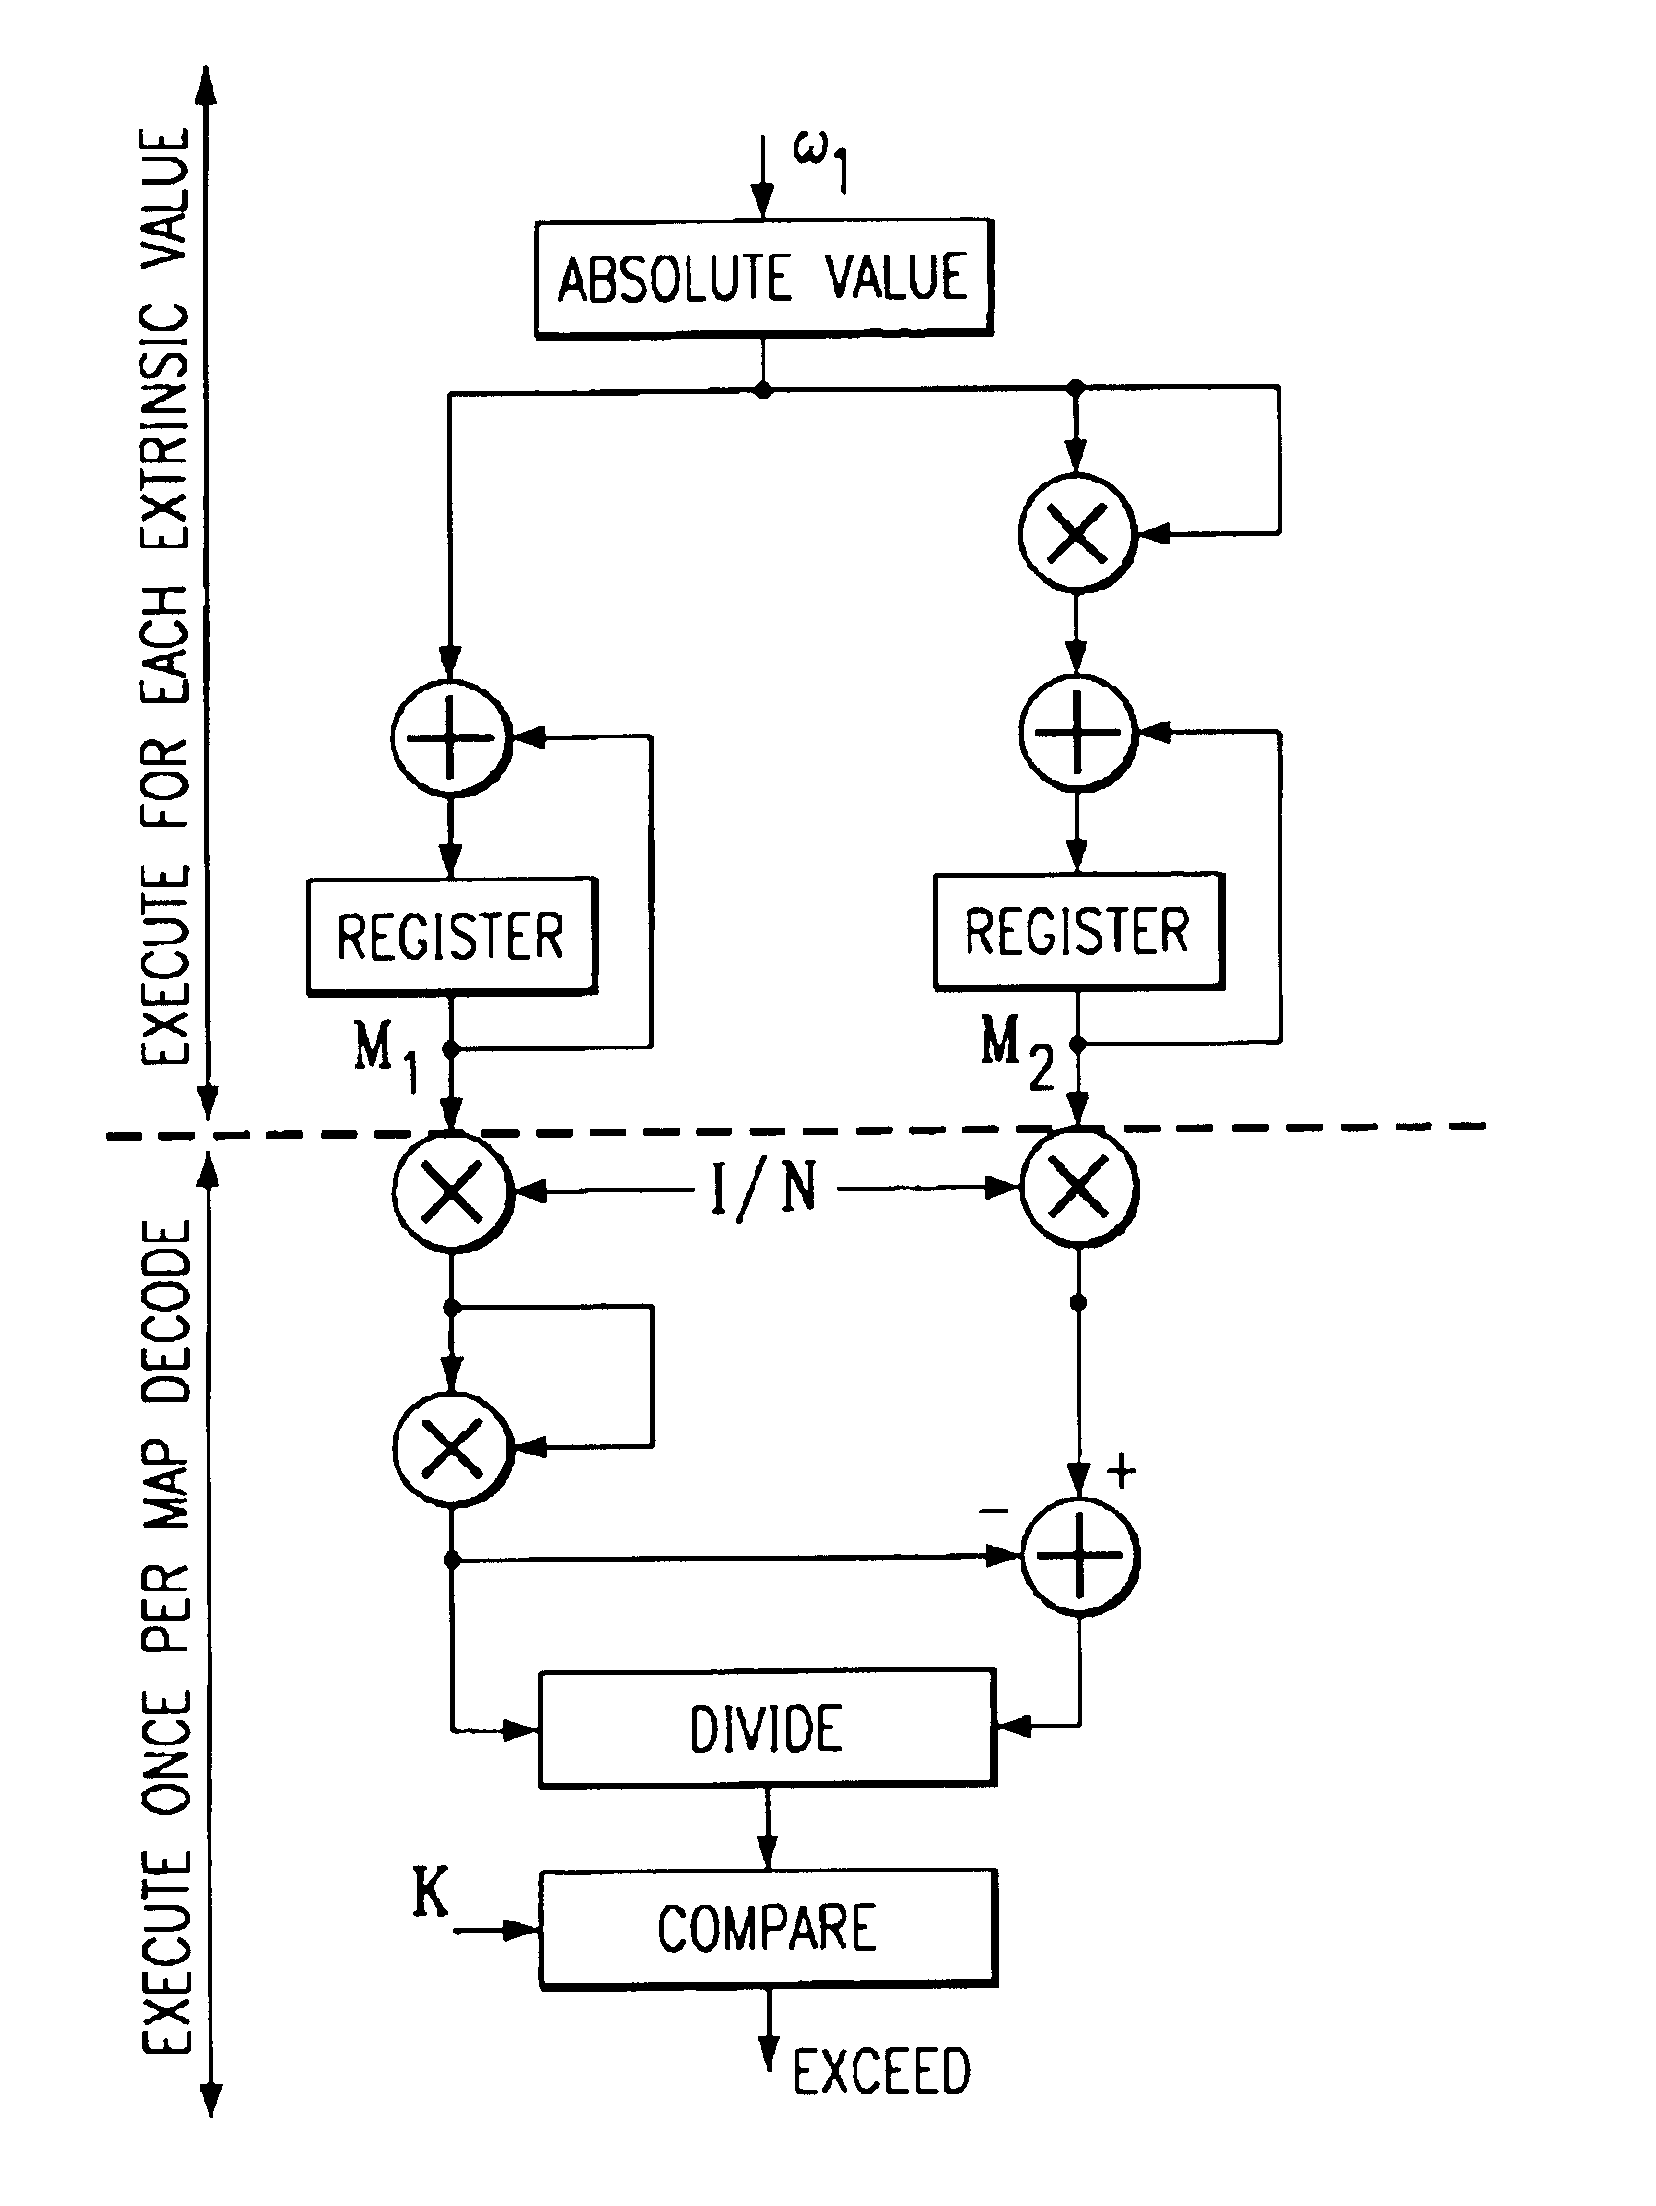 Turbo decoder stopping criterion improvement